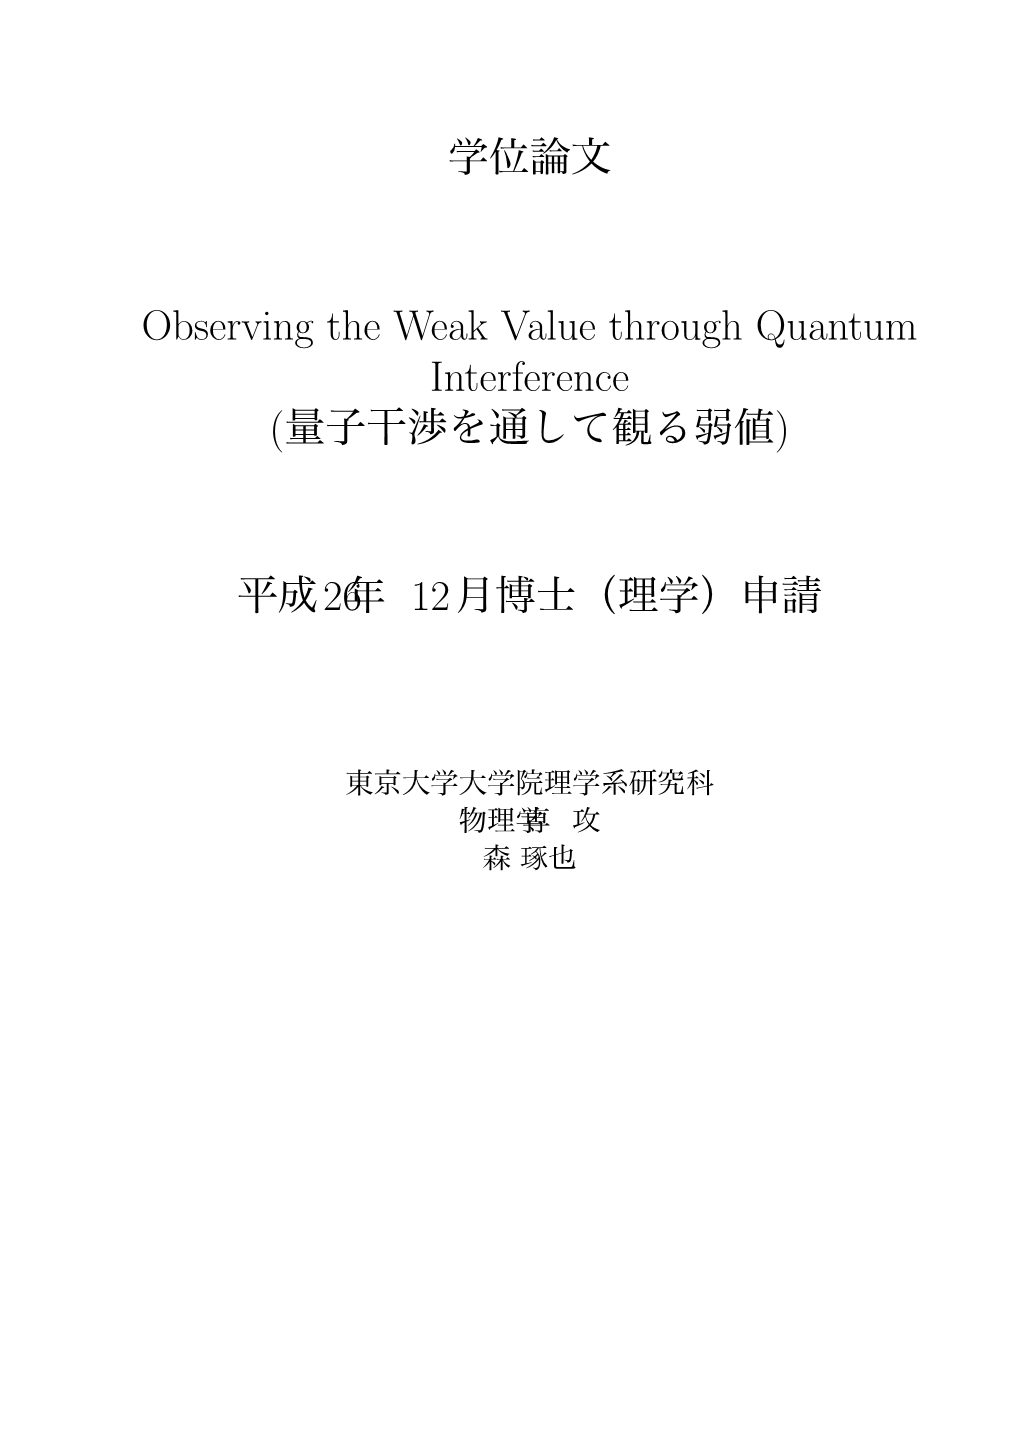 Observing the Weak Value Through Quantum Interference (量子干渉を通して観る弱値)